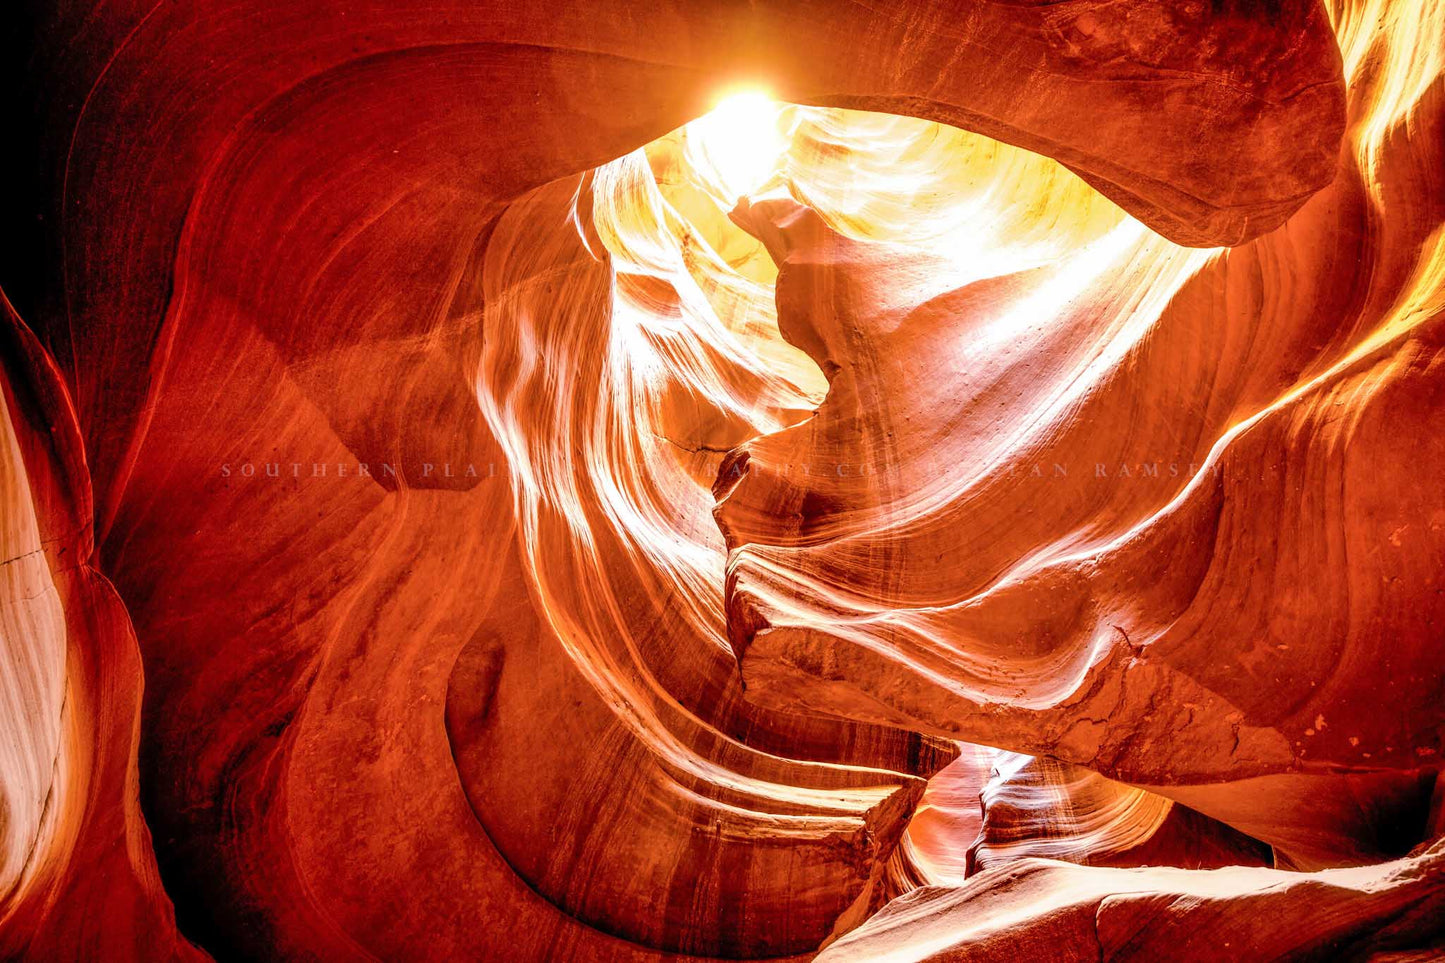 Desert southwest photography print of sunlight peeking through an opening in Antelope Canyon near Page, Arizona by Sean Ramsey of Southern Plains Photography.